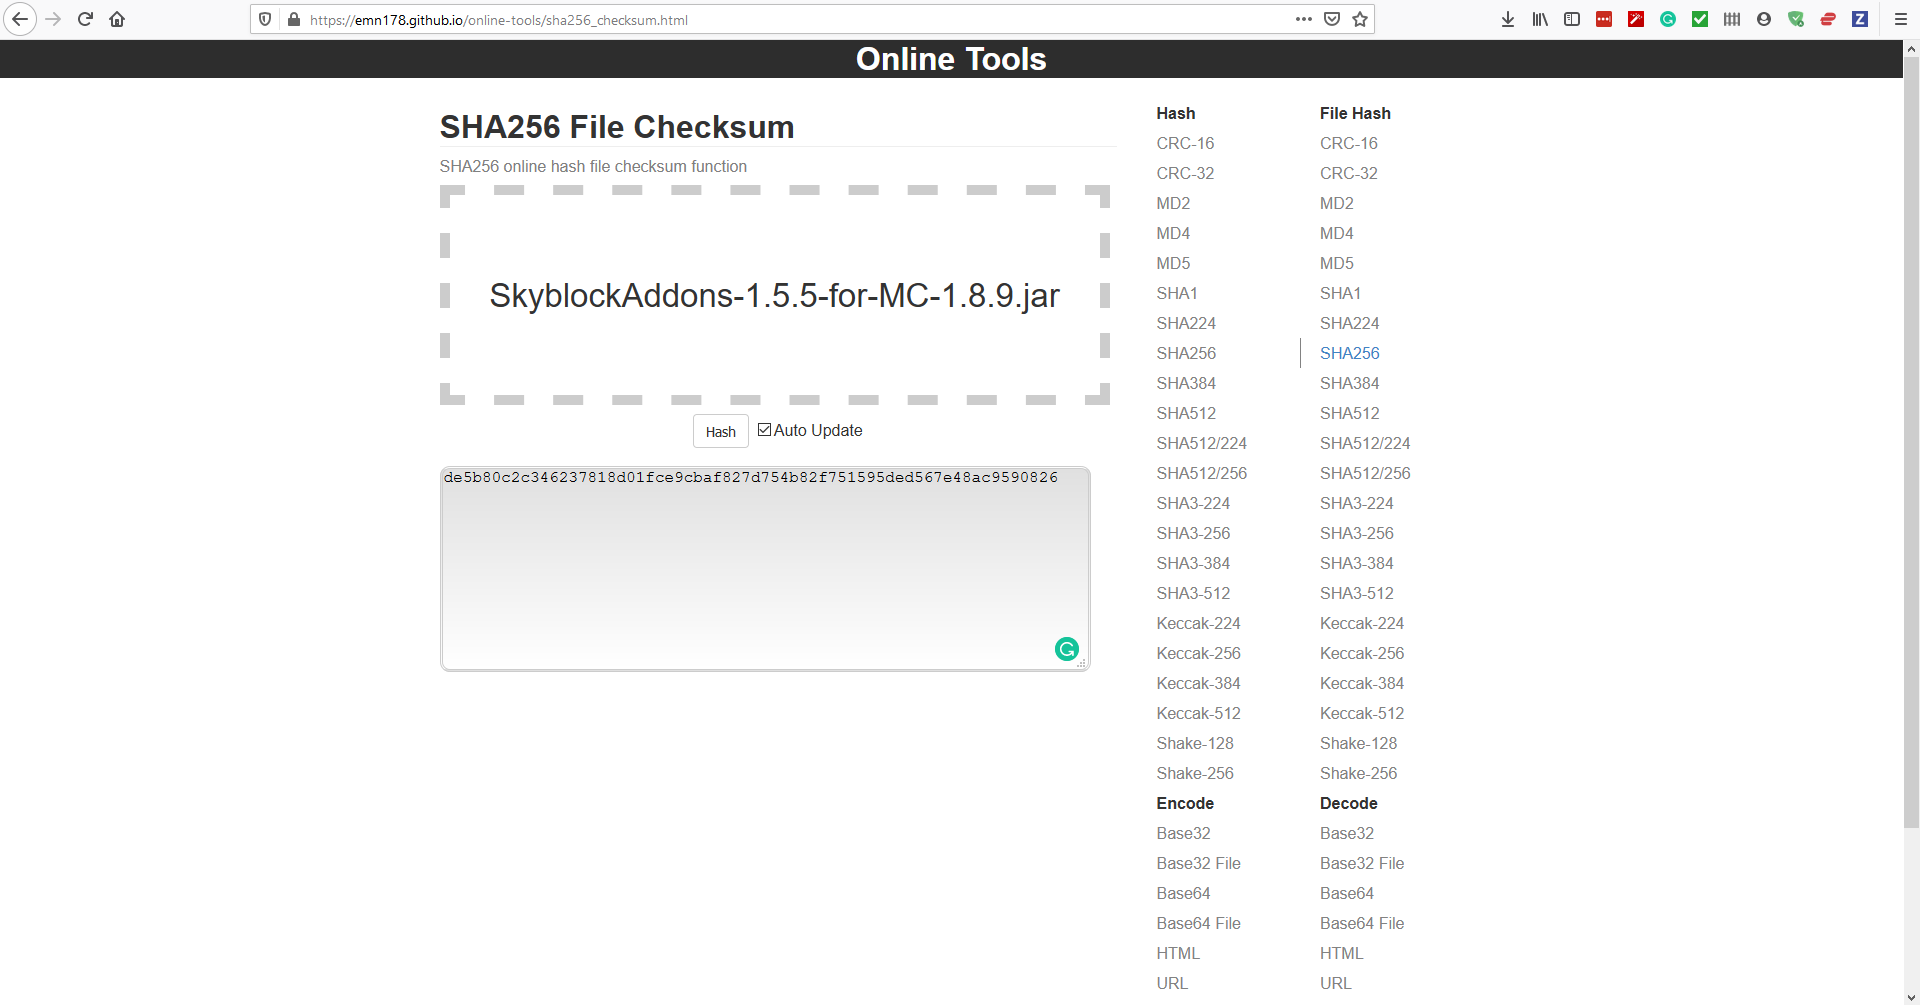 Screenshot of the online file hash tool after it has calculated a file hash for SkyblockAddons v1.5.5